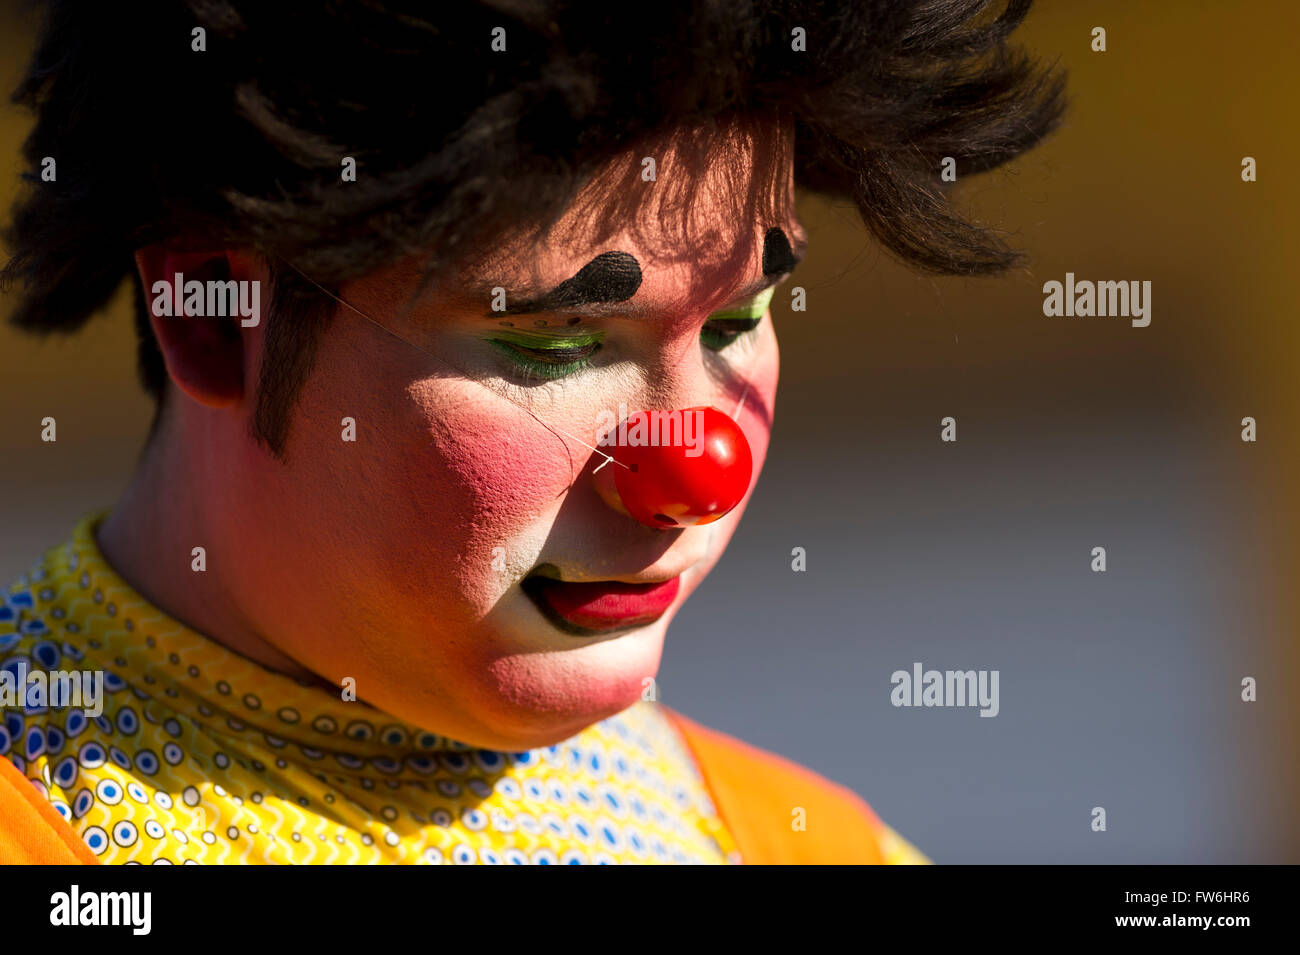 Clown face is a colorfully made up clown with a bright red nose and dark curly hair looking festive. Stock Photo